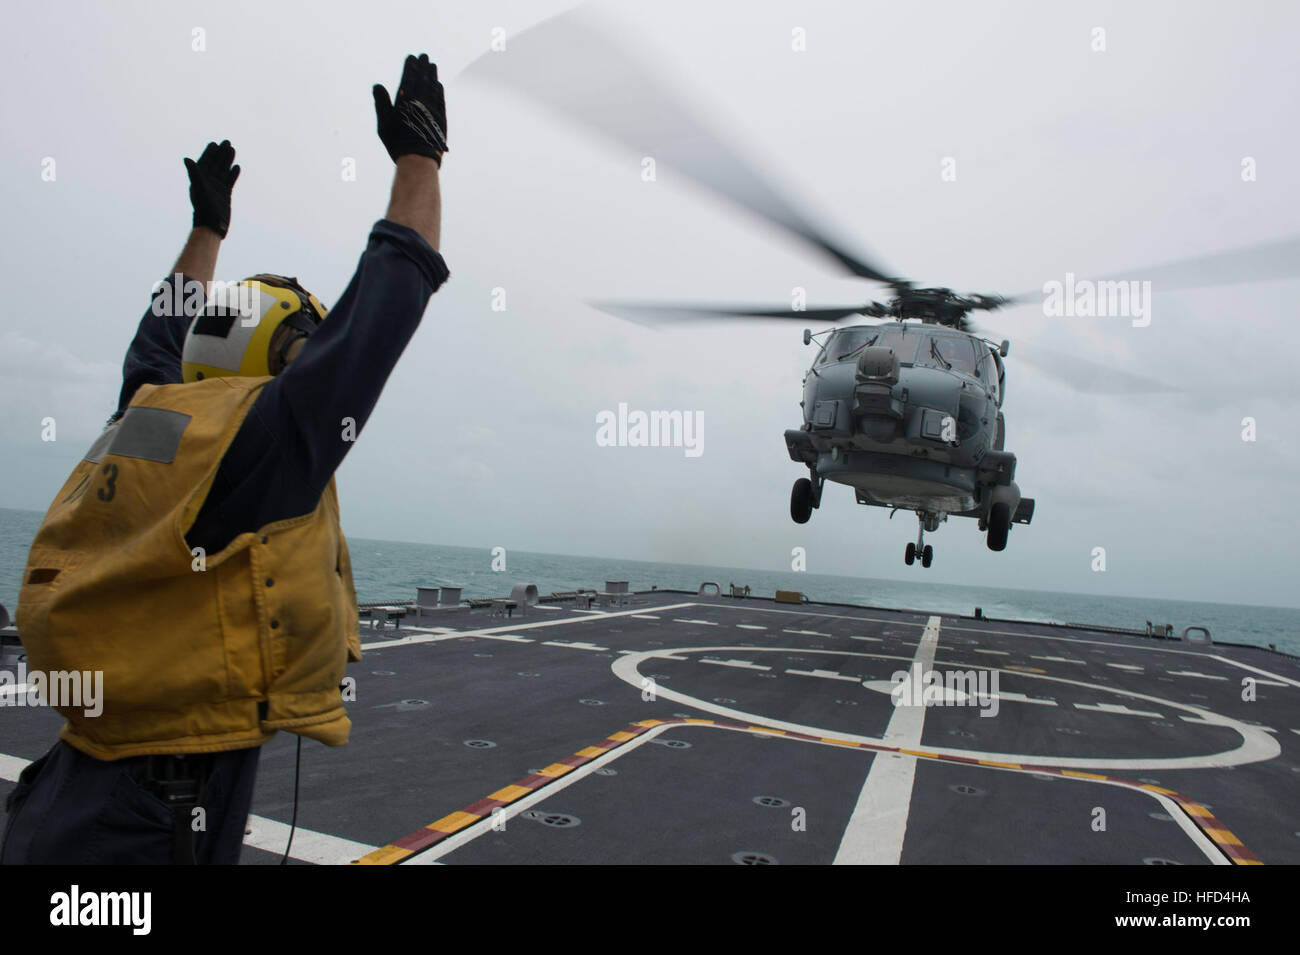 Boatswain’s Mate 2nd Class Adam Garnett signals an MH-60R Seahawk helicopter from Helicopter Maritime Strike Squadron (HSM) 35 on the flight deck of the littoral combat ship USS Fort Worth (LCS 3). Fort Worth is currently on station conducting helicopter search and recovery operations as part of the Indonesian-led efforts to locate missing AirAsia Flight QZ8501. (U.S. Navy photo by Mass Communication Specialist 2nd Class Antonio P. Turretto Ramos) Signalling an MH-60R Seahawk helicopter from Helicopter Maritime Strike Squadron (HSM) 35 on the flight deck of the littoral combat ship USS Fort Wo Stock Photo